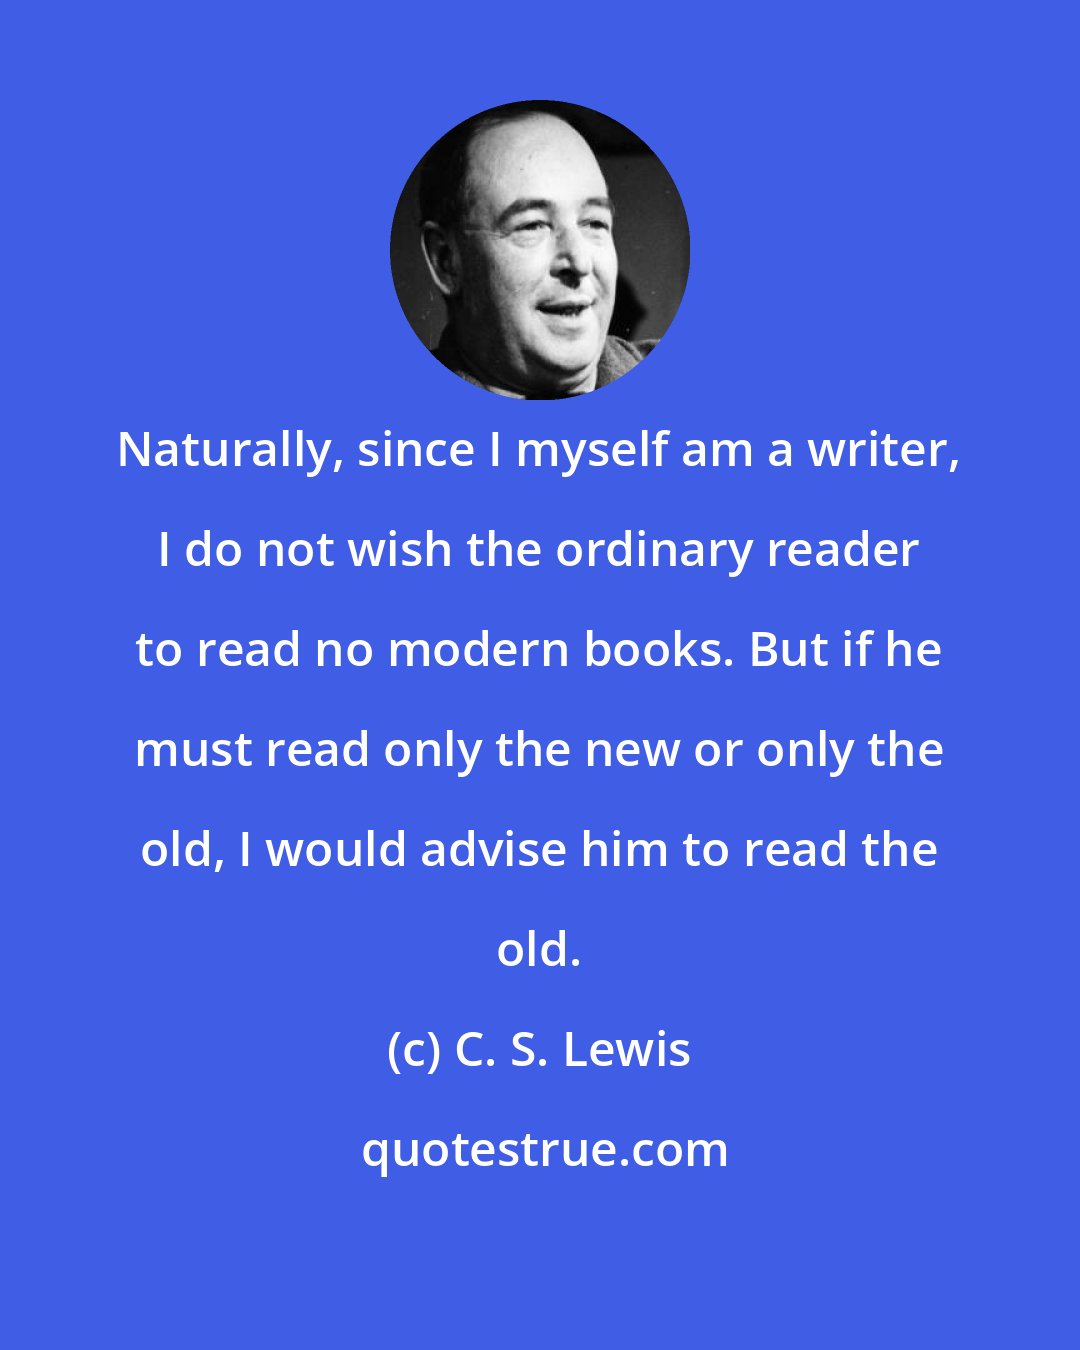 C. S. Lewis: Naturally, since I myself am a writer, I do not wish the ordinary reader to read no modern books. But if he must read only the new or only the old, I would advise him to read the old.